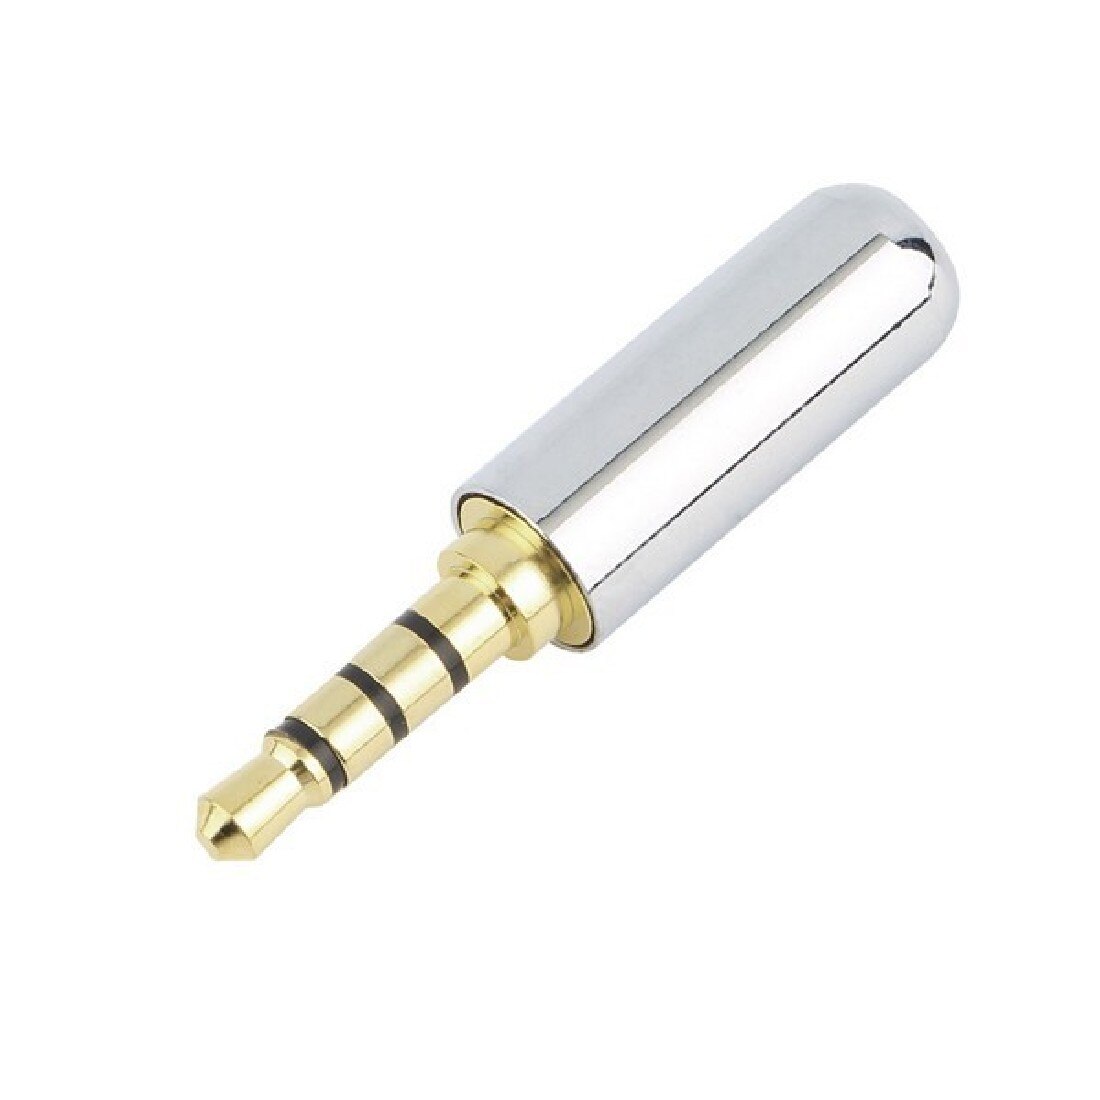 4 Poles 3.5 mm 1/8 Stereo Jack Plug Dual Channel Cover Connector Plugs for Headphone Earphone Soldering